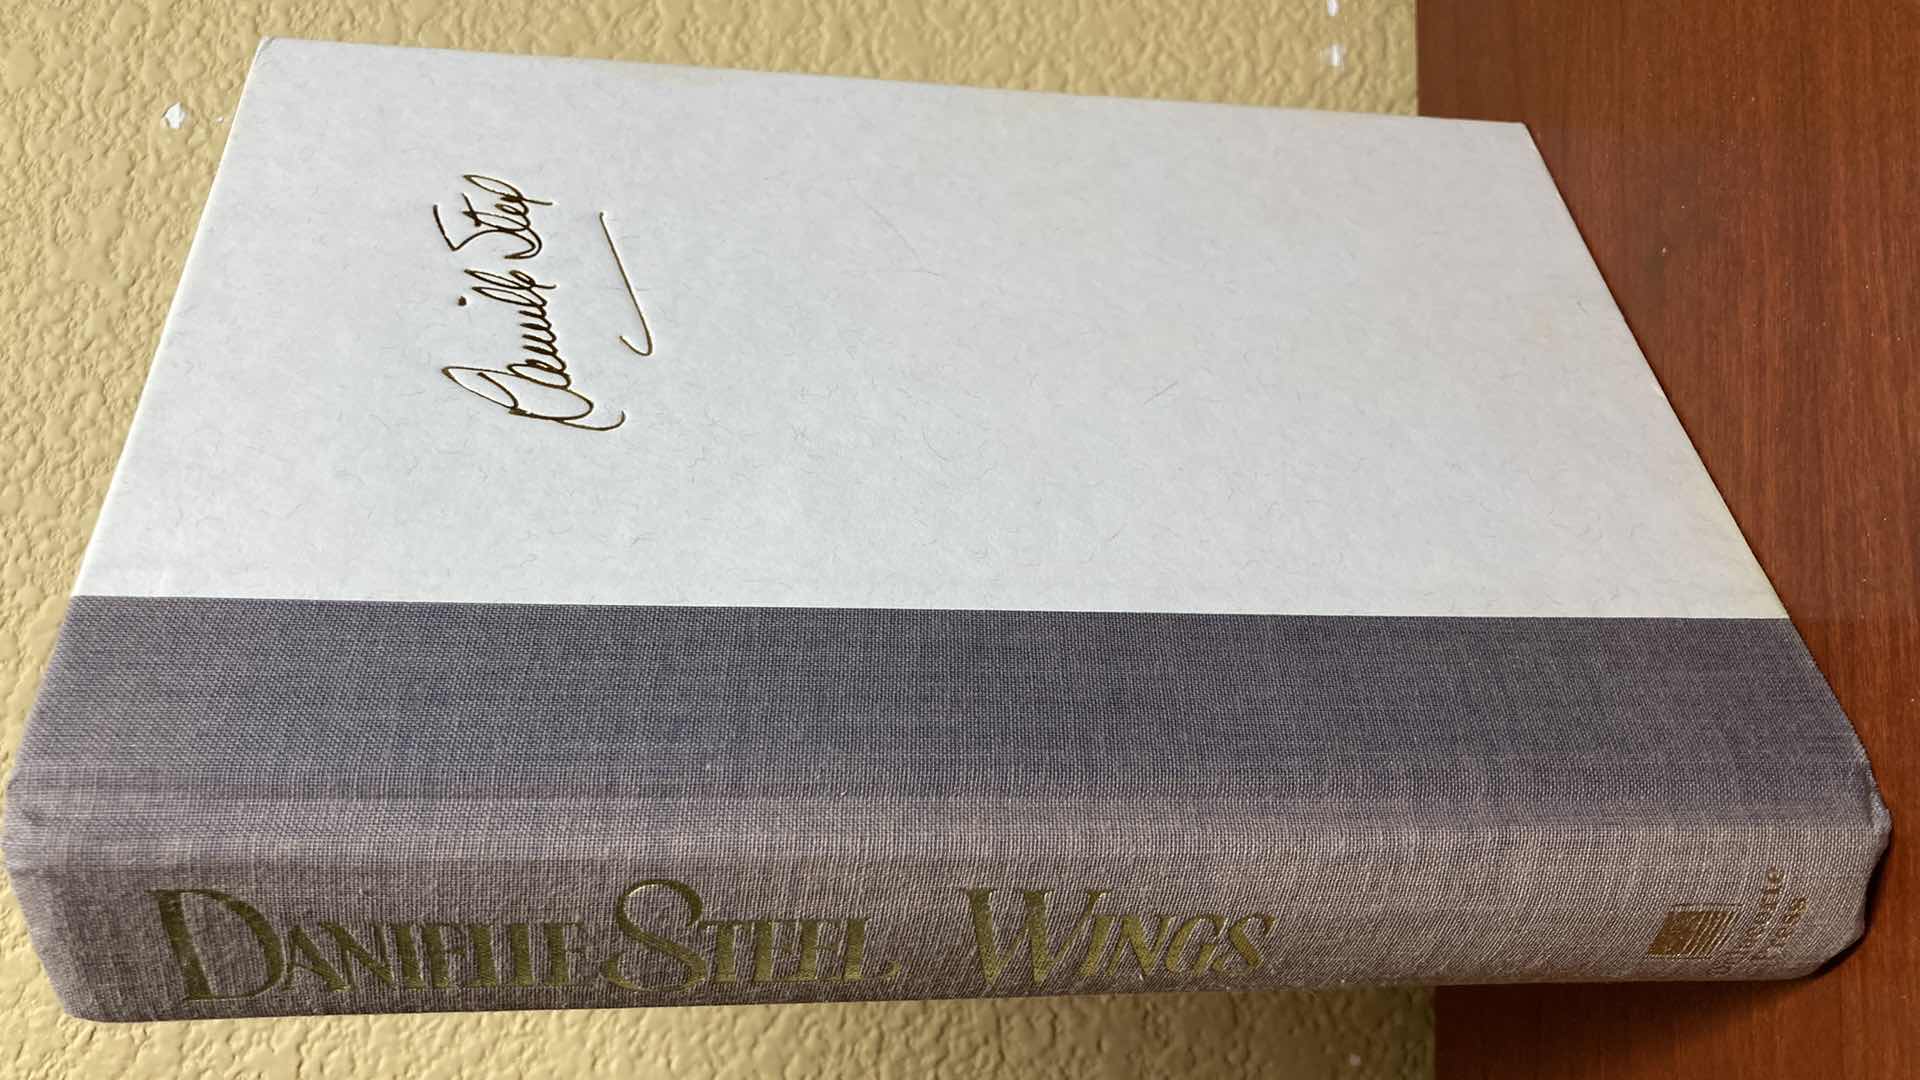 Photo 1 of WINGS AUTOGRAPHED BY DANIELLE STEEL HARD COVER BOOK